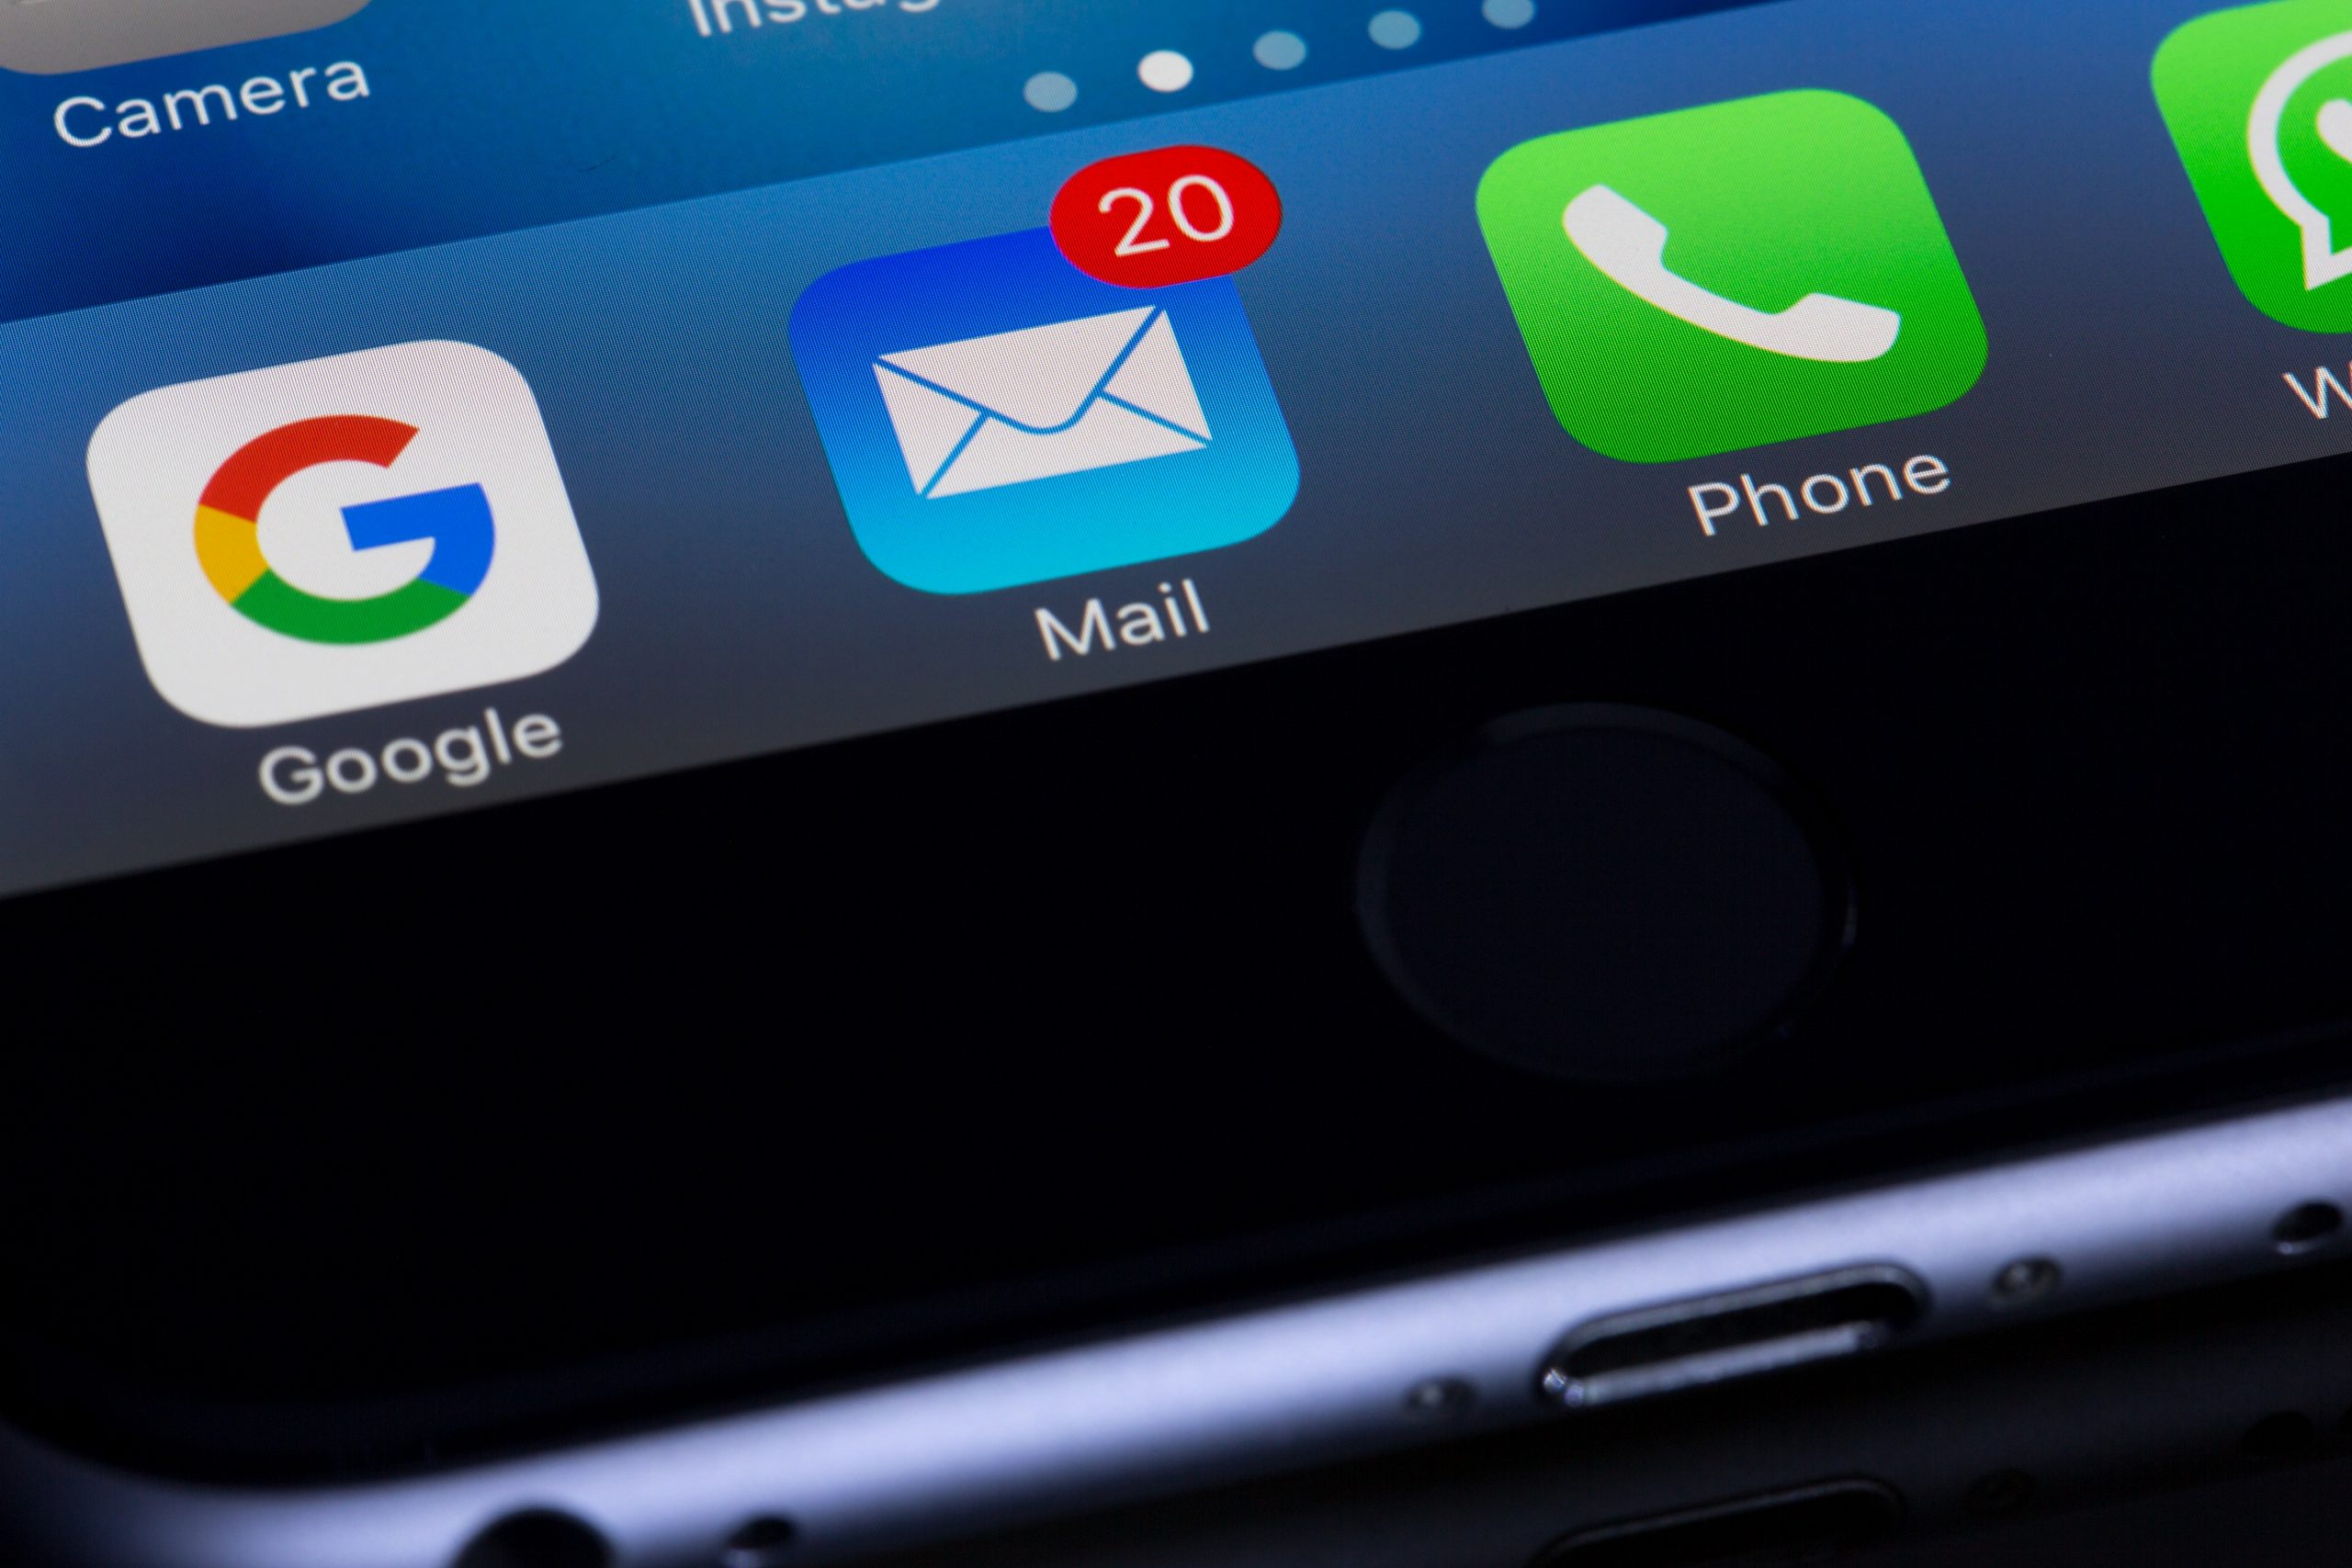 How do I set up Email on My iPhone